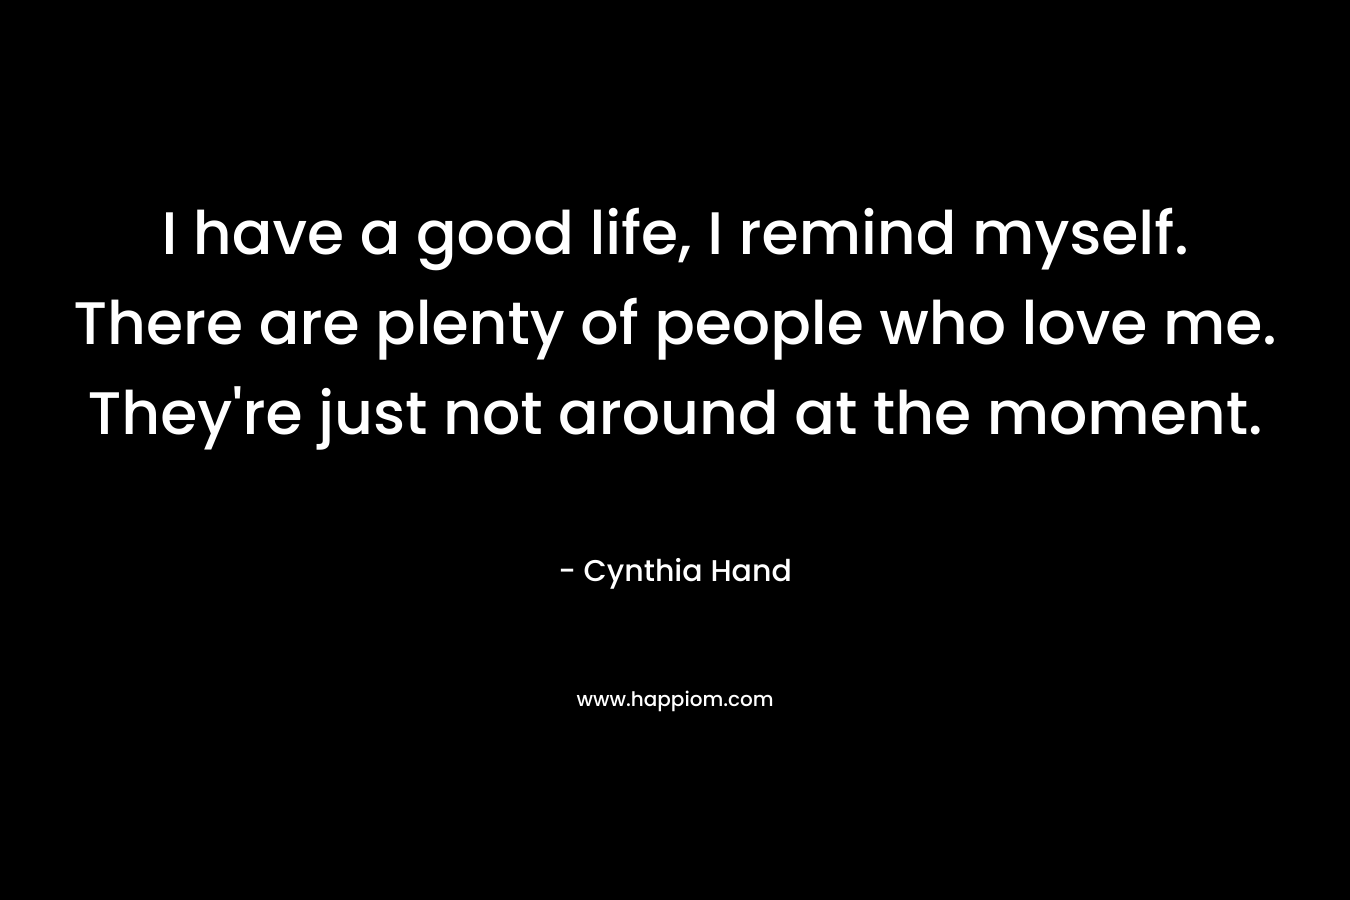 I have a good life, I remind myself. There are plenty of people who love me. They’re just not around at the moment. – Cynthia Hand